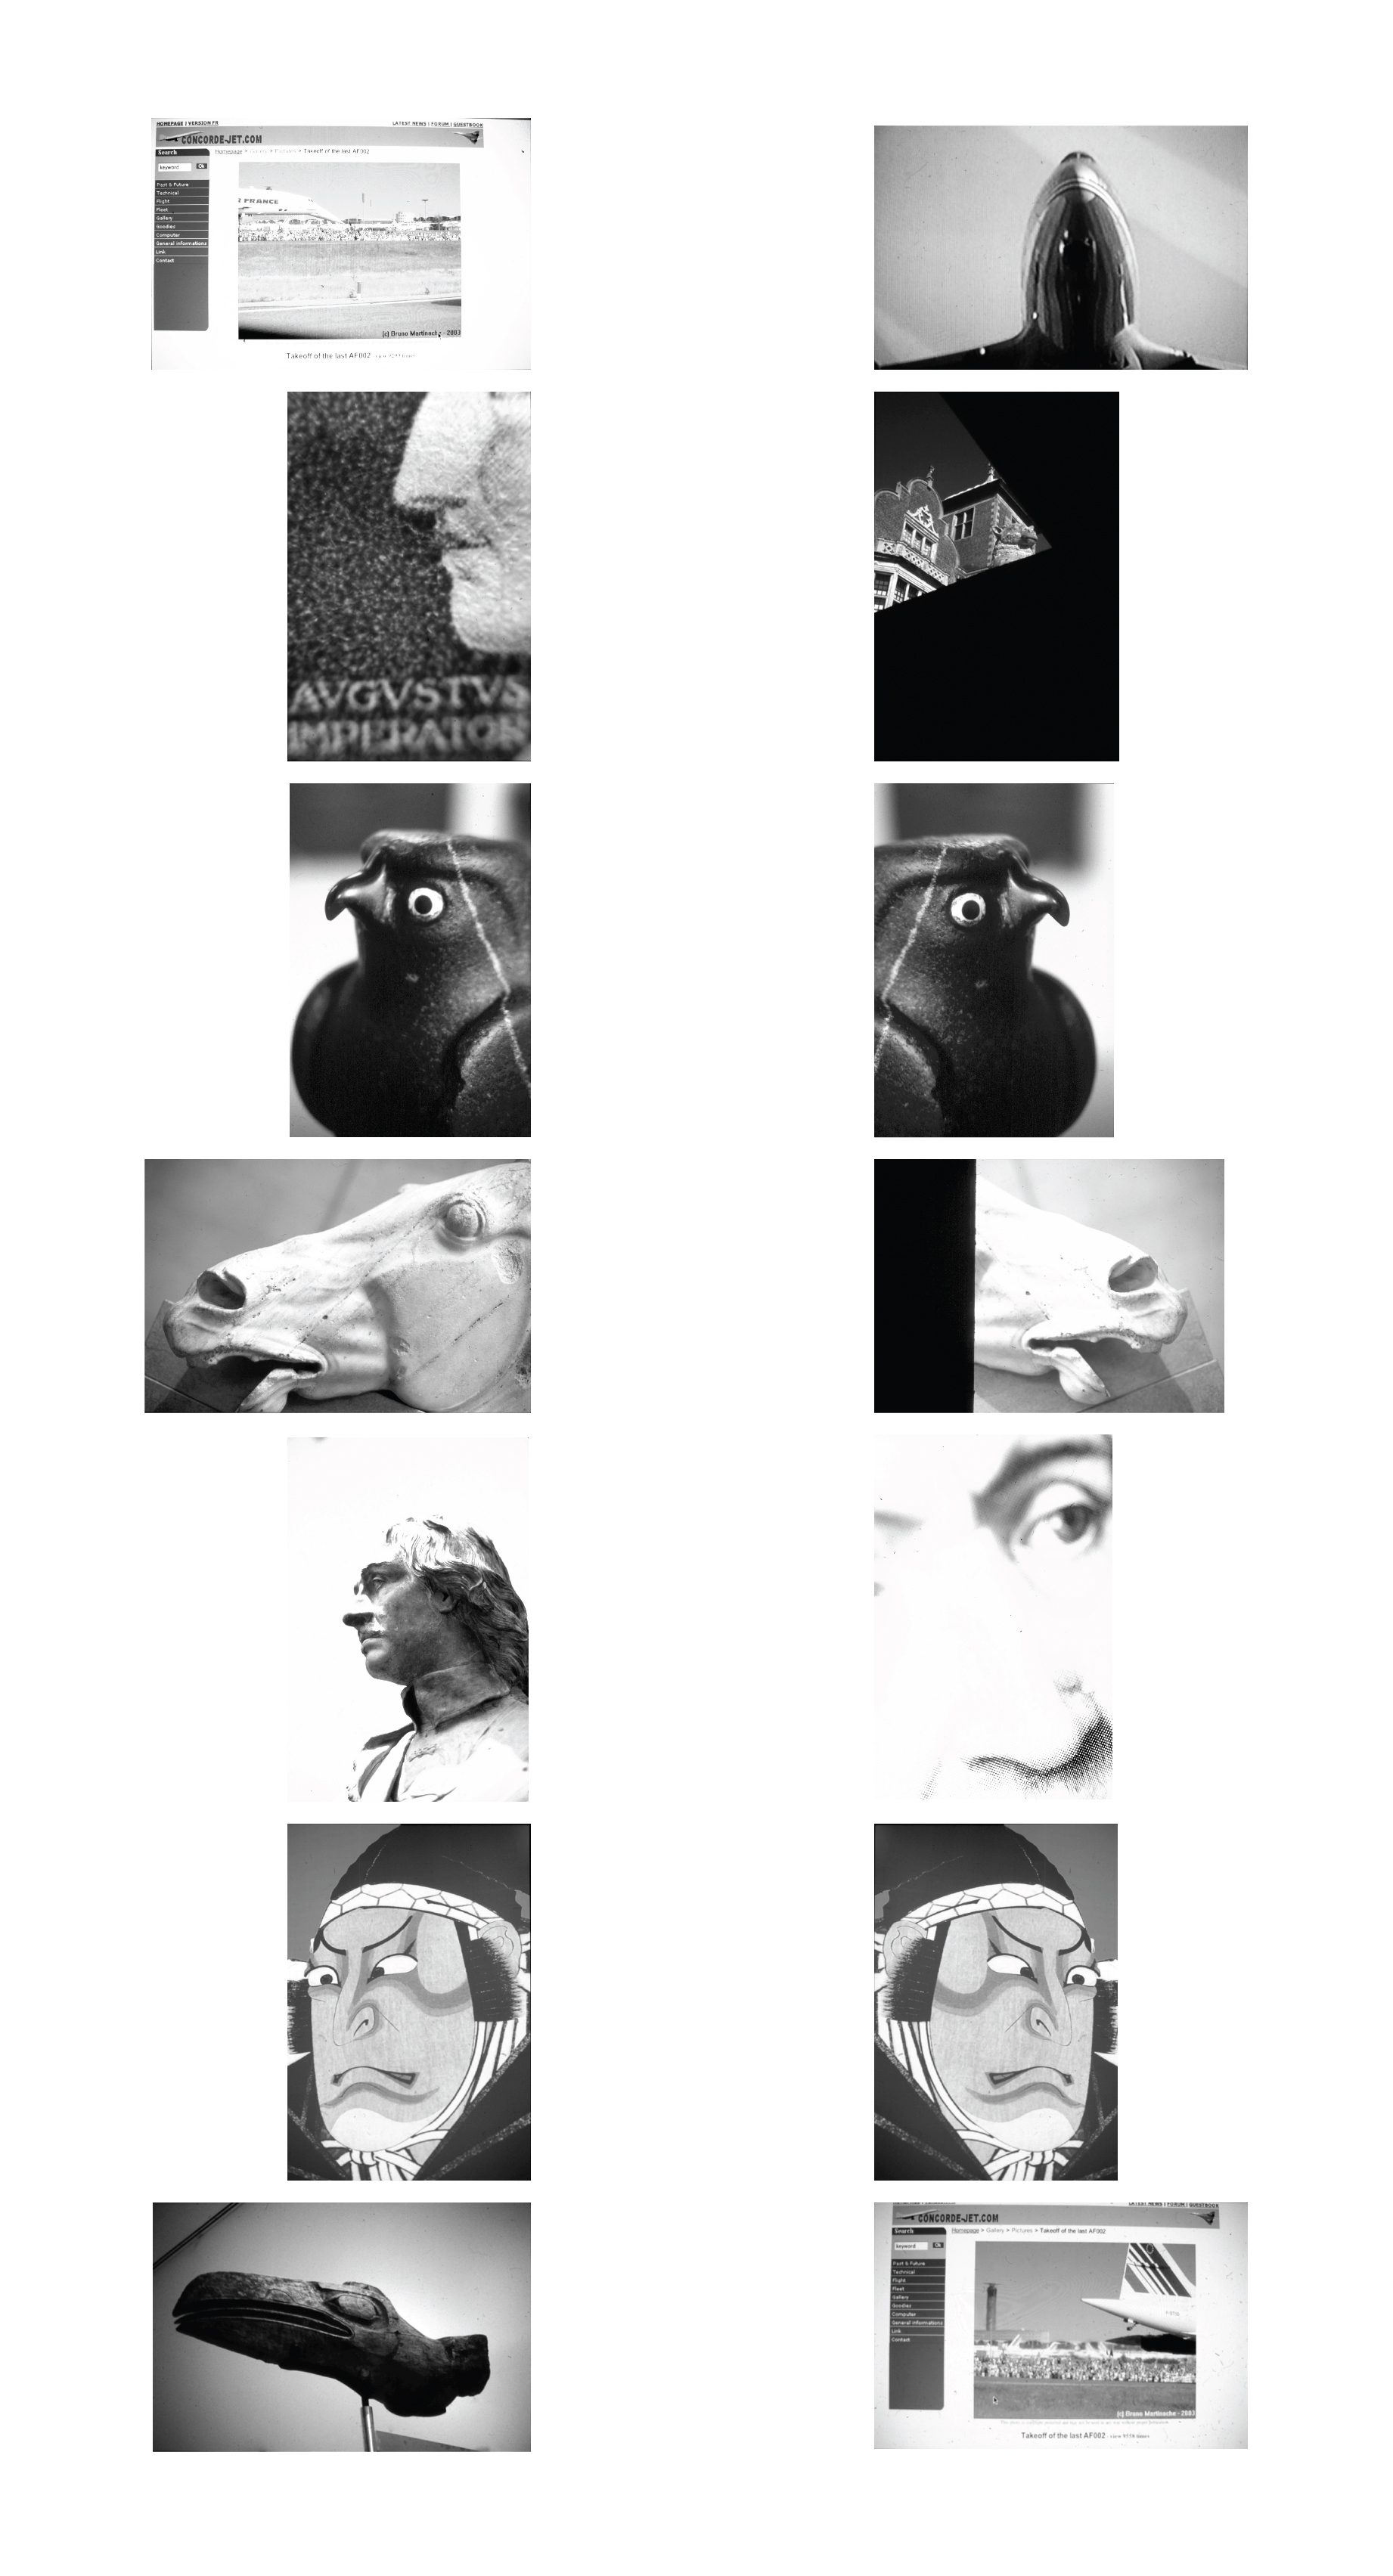 A two thousand six artwork by Simon Patterson composed of several individual photographs and illustrations and titled “Some Important Noses from Nose to Tail, two thousand and five.”